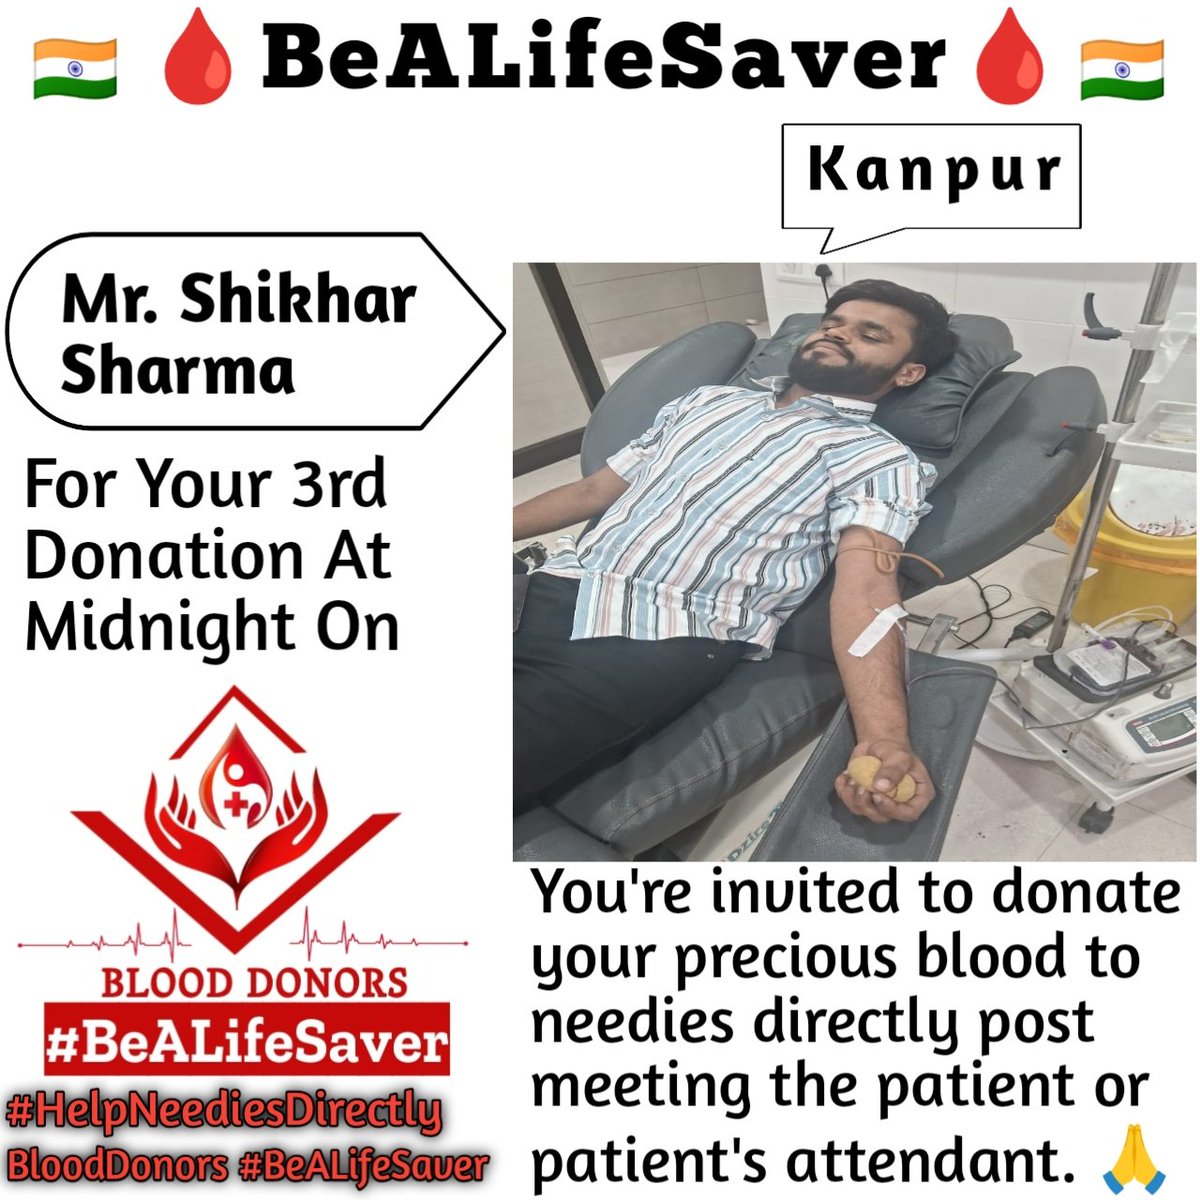 Kanpur BeALifeSaver
Kudos_Mr_Shikhar_Sharma_Ji

Today's hero
Mr. Shikhar_Sharma Ji donated blood At Midnight in Kanpur for the 3rd Time for one of the needies. Heartfelt Gratitude and Respect to Shikhar Sharma Ji for his blood donation for Patient admitted in Kanpur.